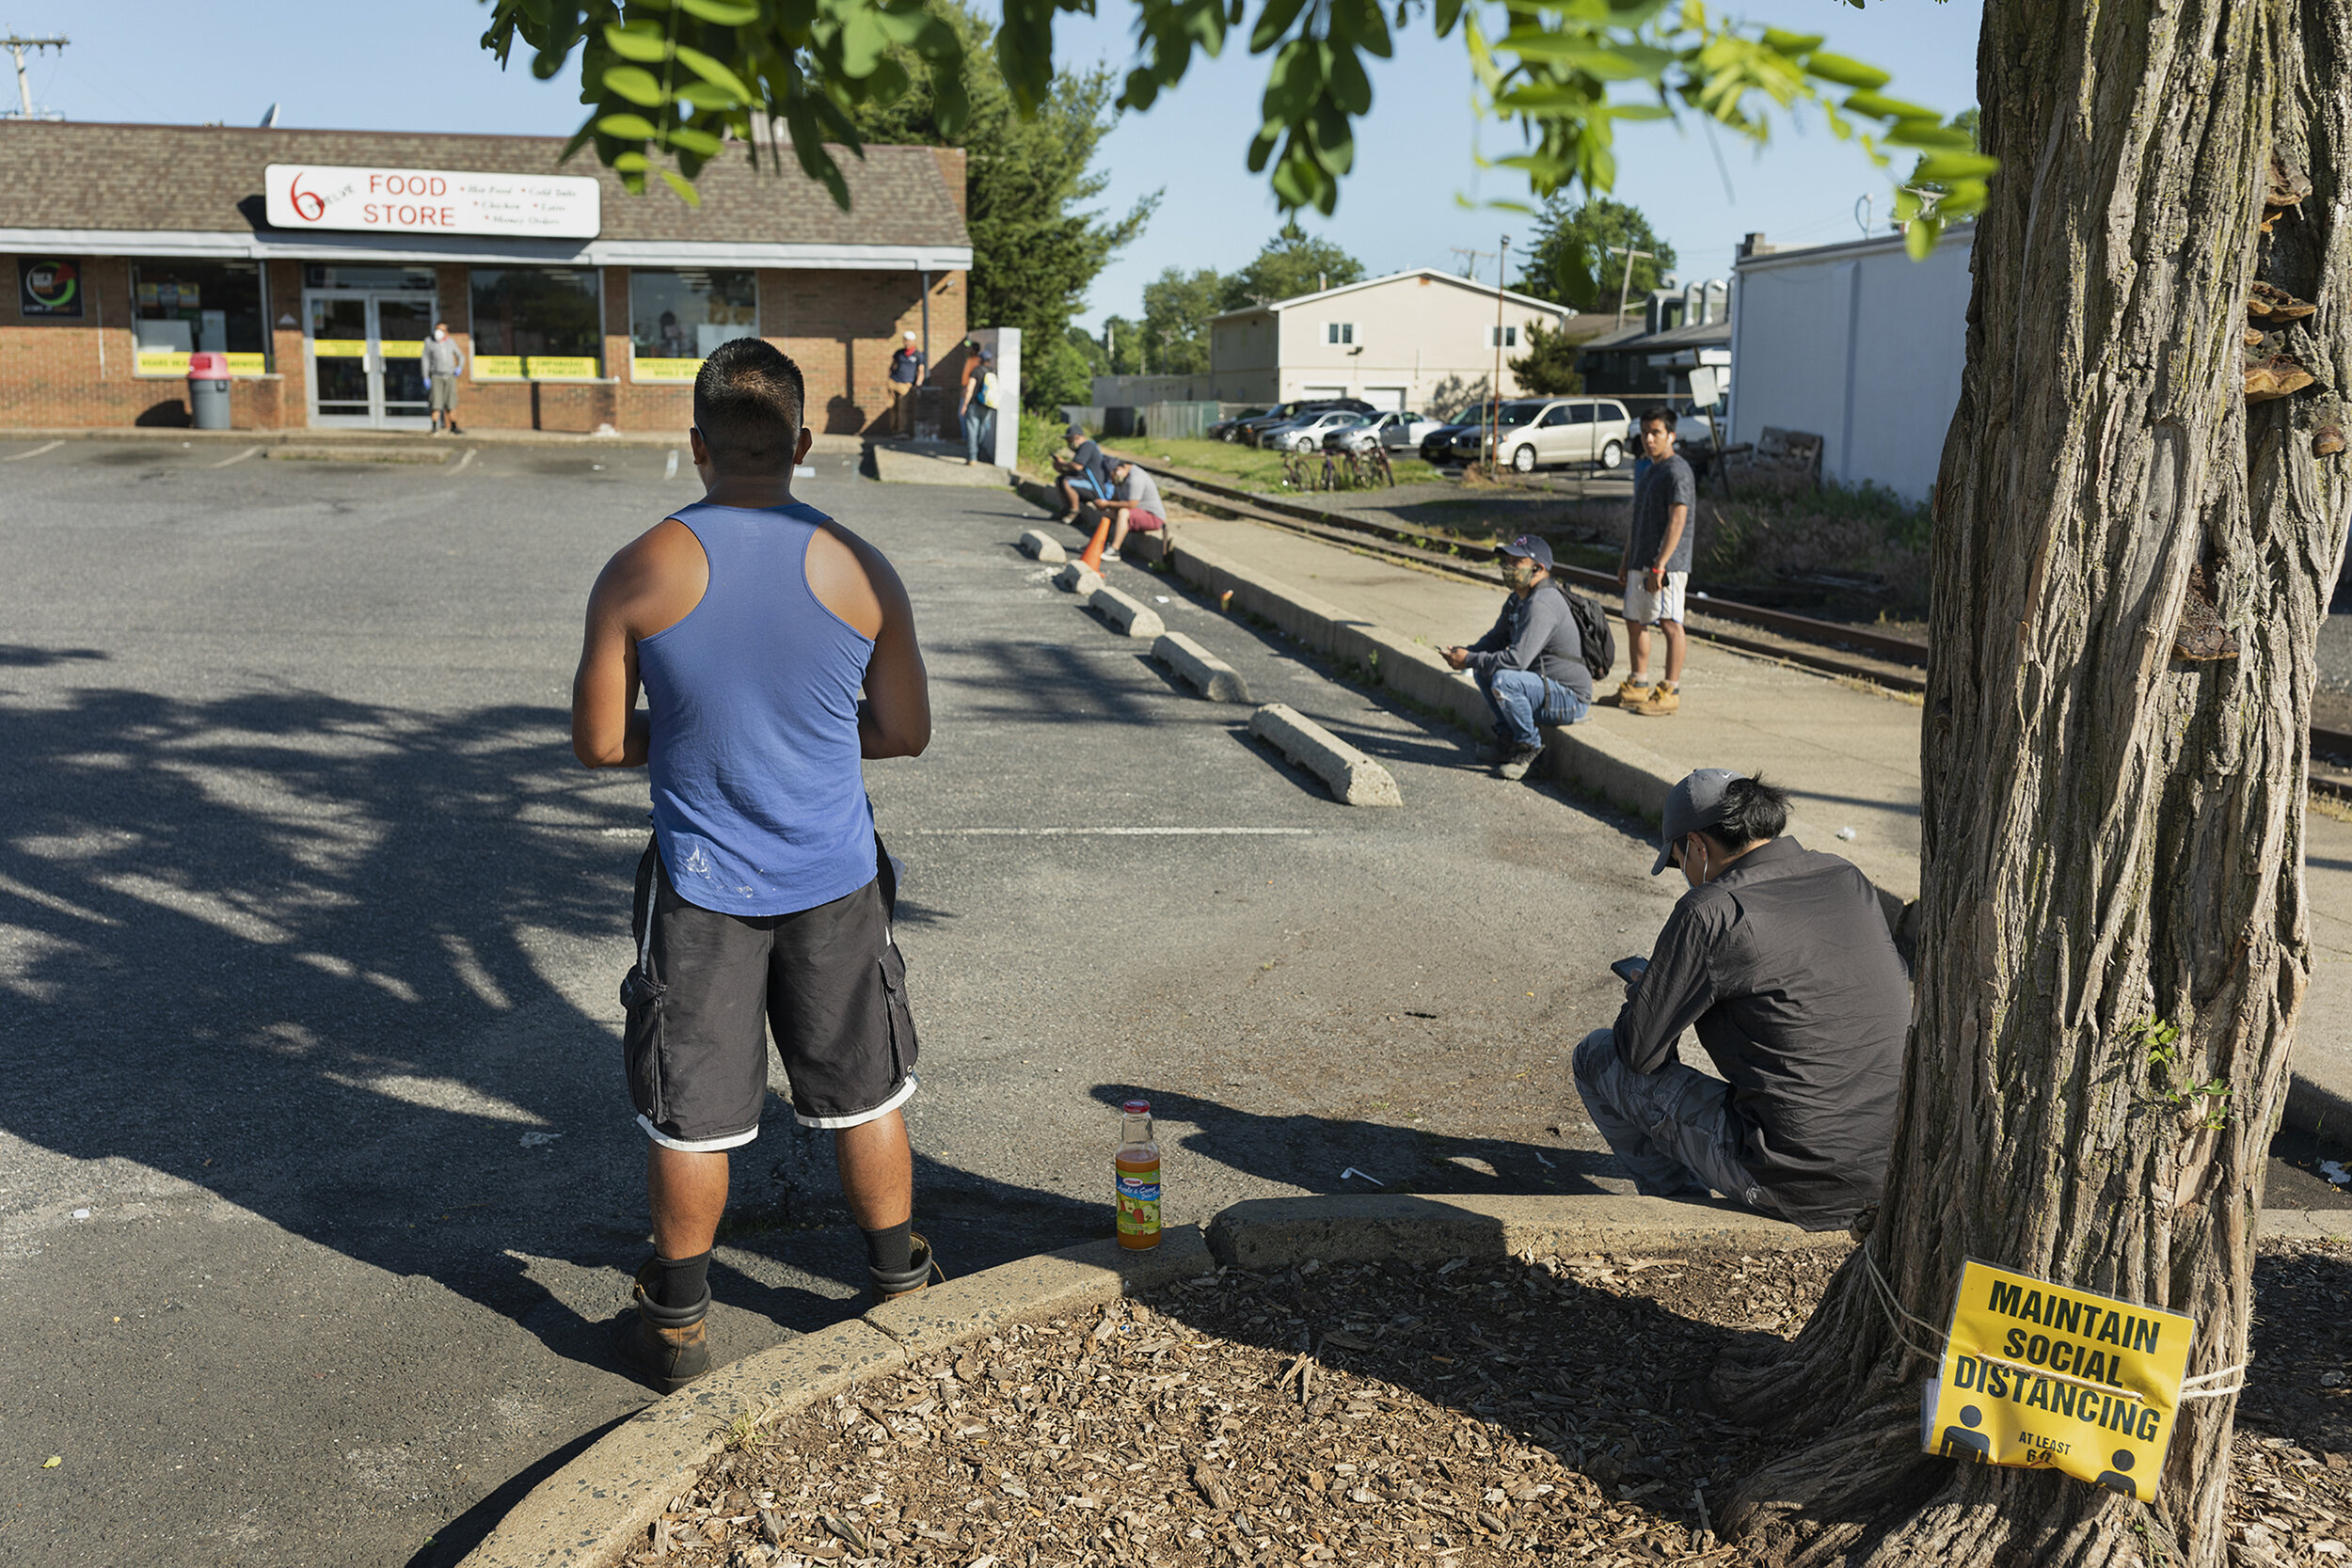  Day laborers wait for work in Freehold, New Jersey on June 9, 2020. 